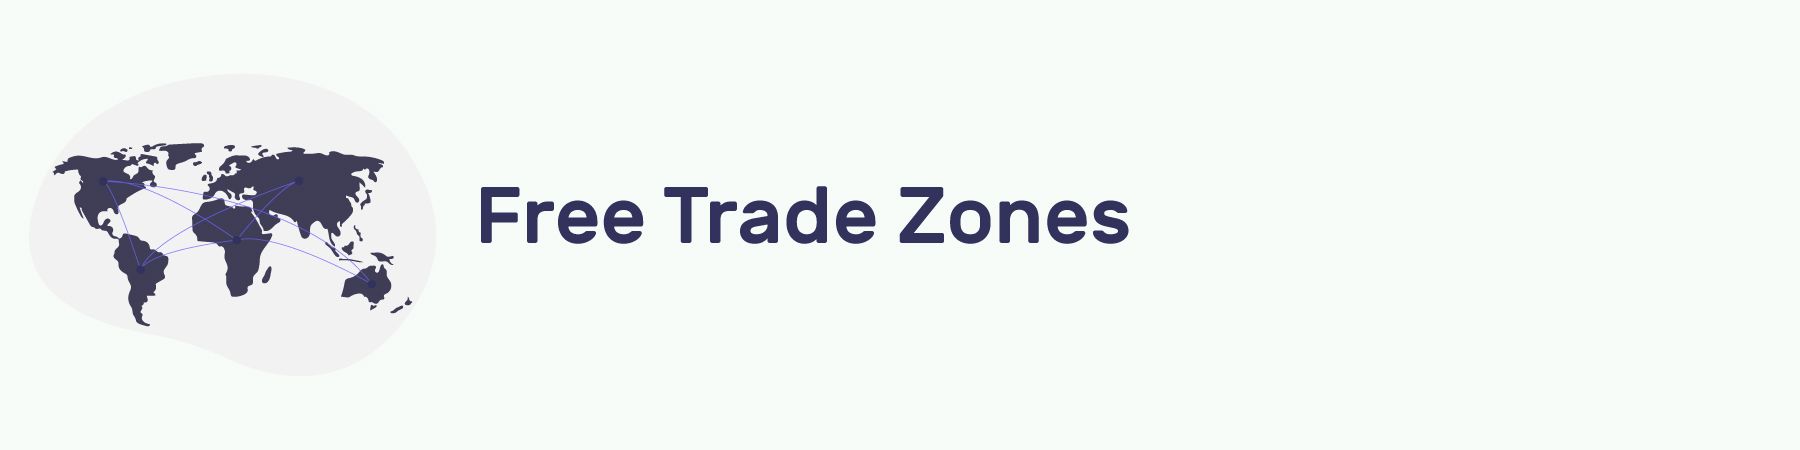 Free Trade Zones Section Header